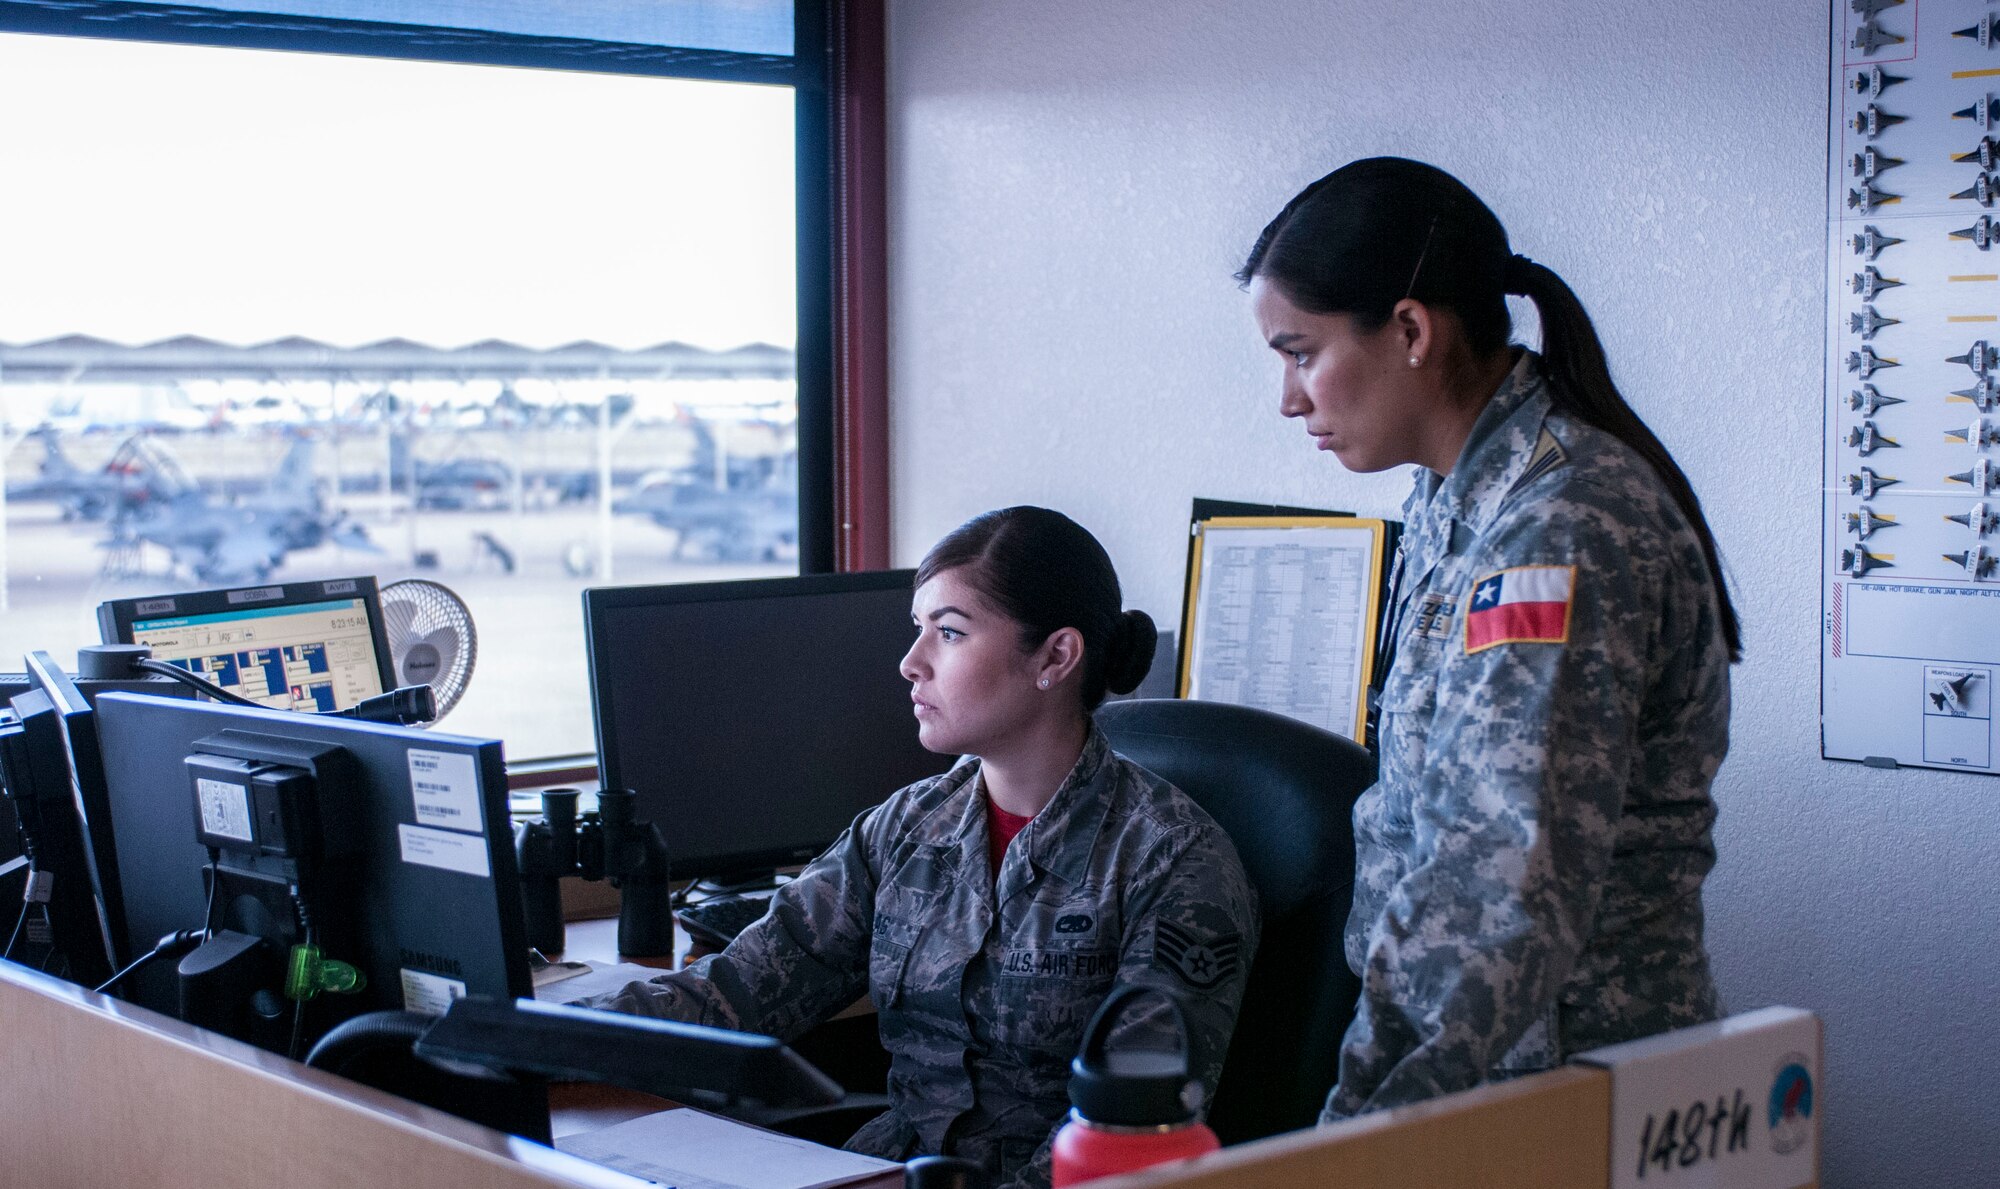 Capt. Andrea Garcia, right, a Chilean air force exchange officer, monitors maintenance operations on the 162nd Wing flight line from the wing’s maintenance operations center with Staff Sgt. Emma Yslas.  (U.S. Air National Guard photo by Staff Sgt. Gregory Ferreira)